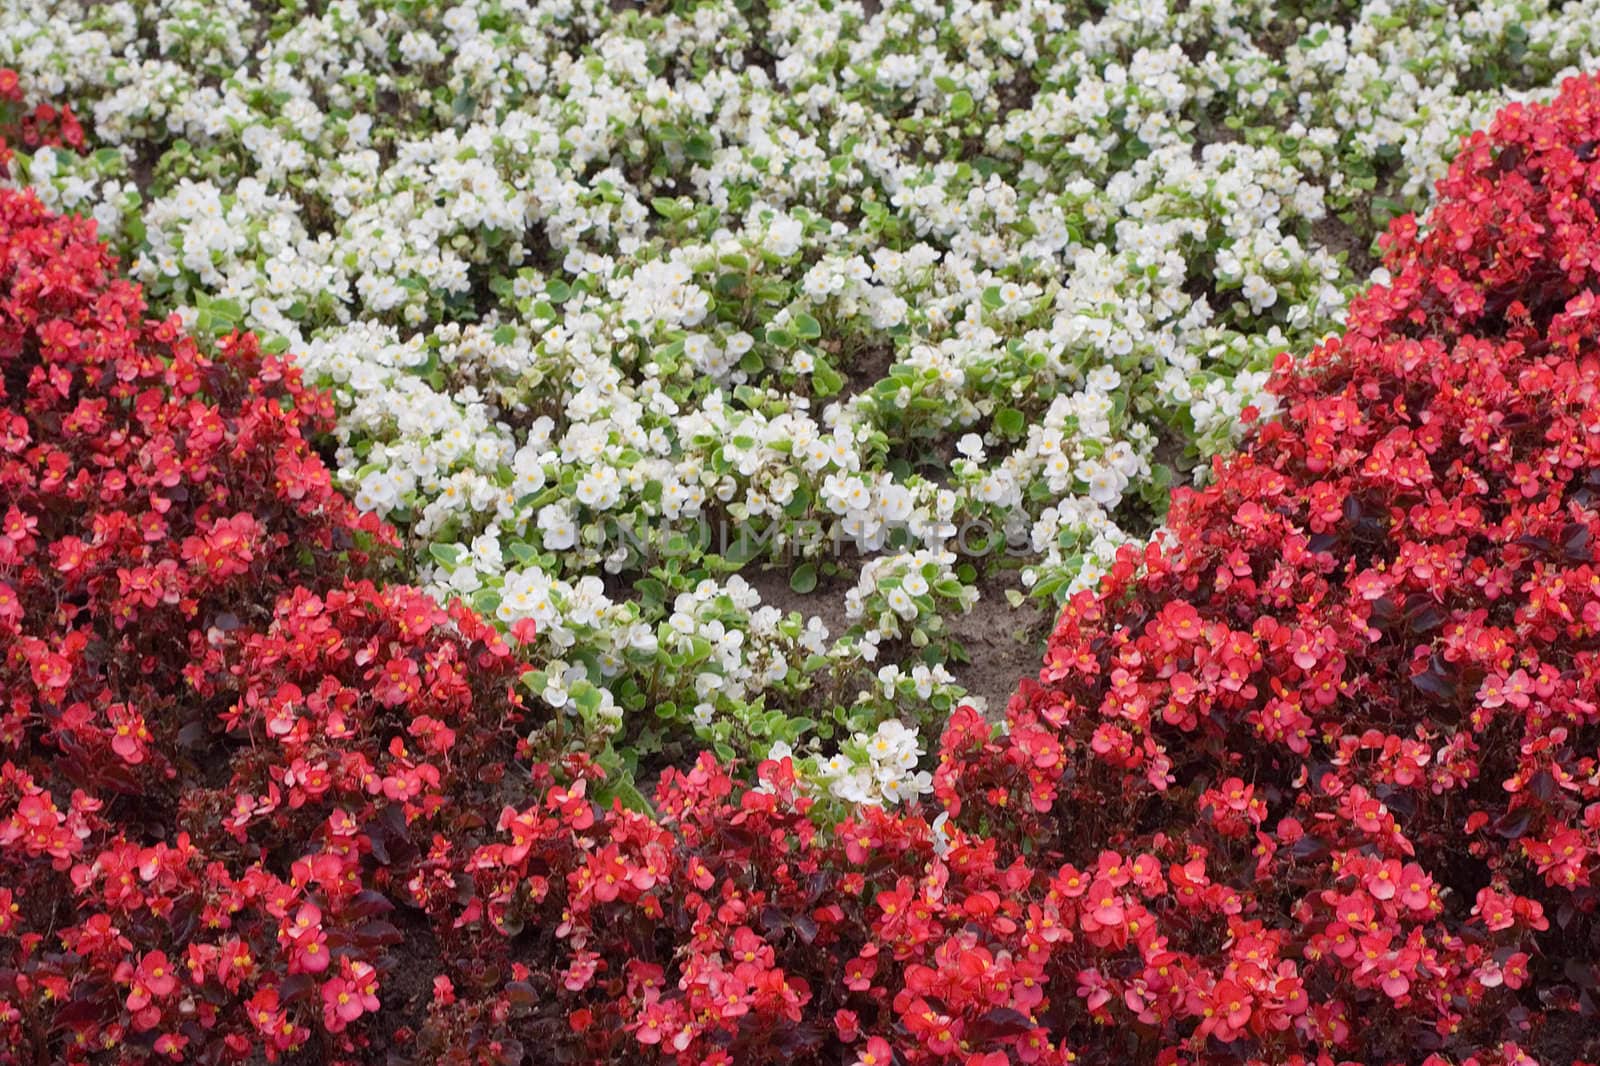 Small red and white flowers on a flowerbed arranged in a triangular pattern